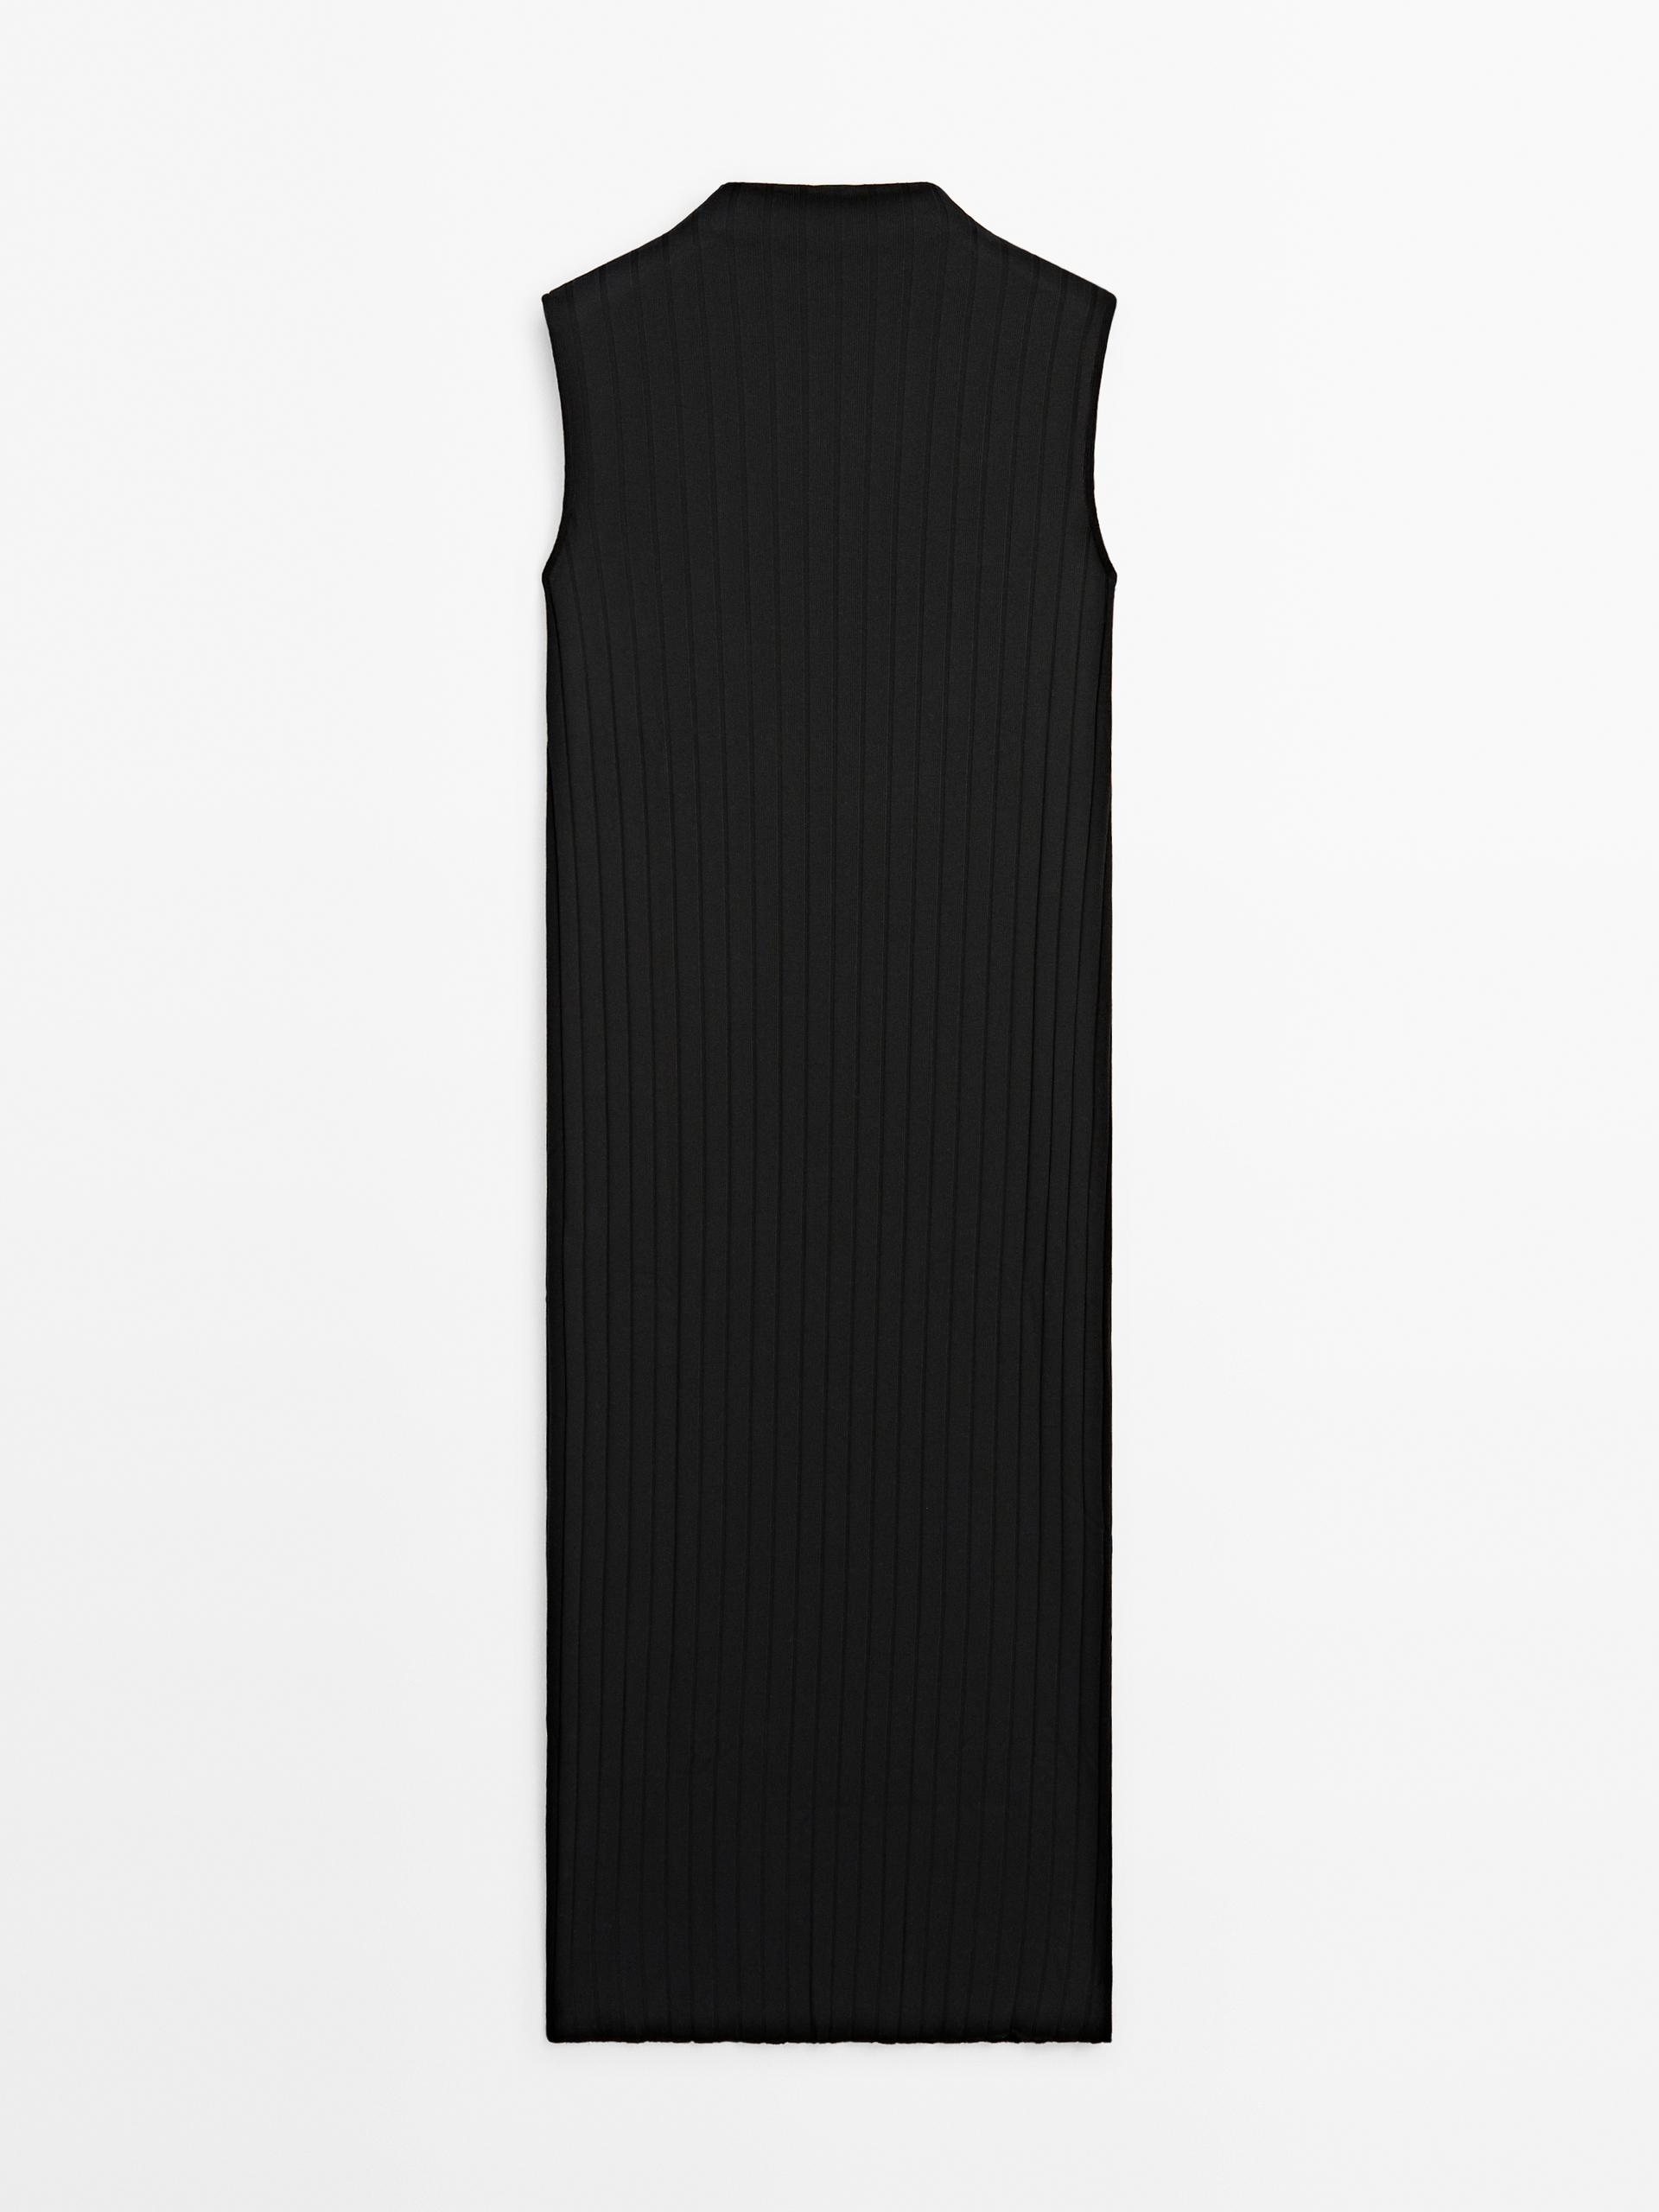 Zara Ribbed Knit Dress  23 Ribbed Dresses You 100% Need For Your